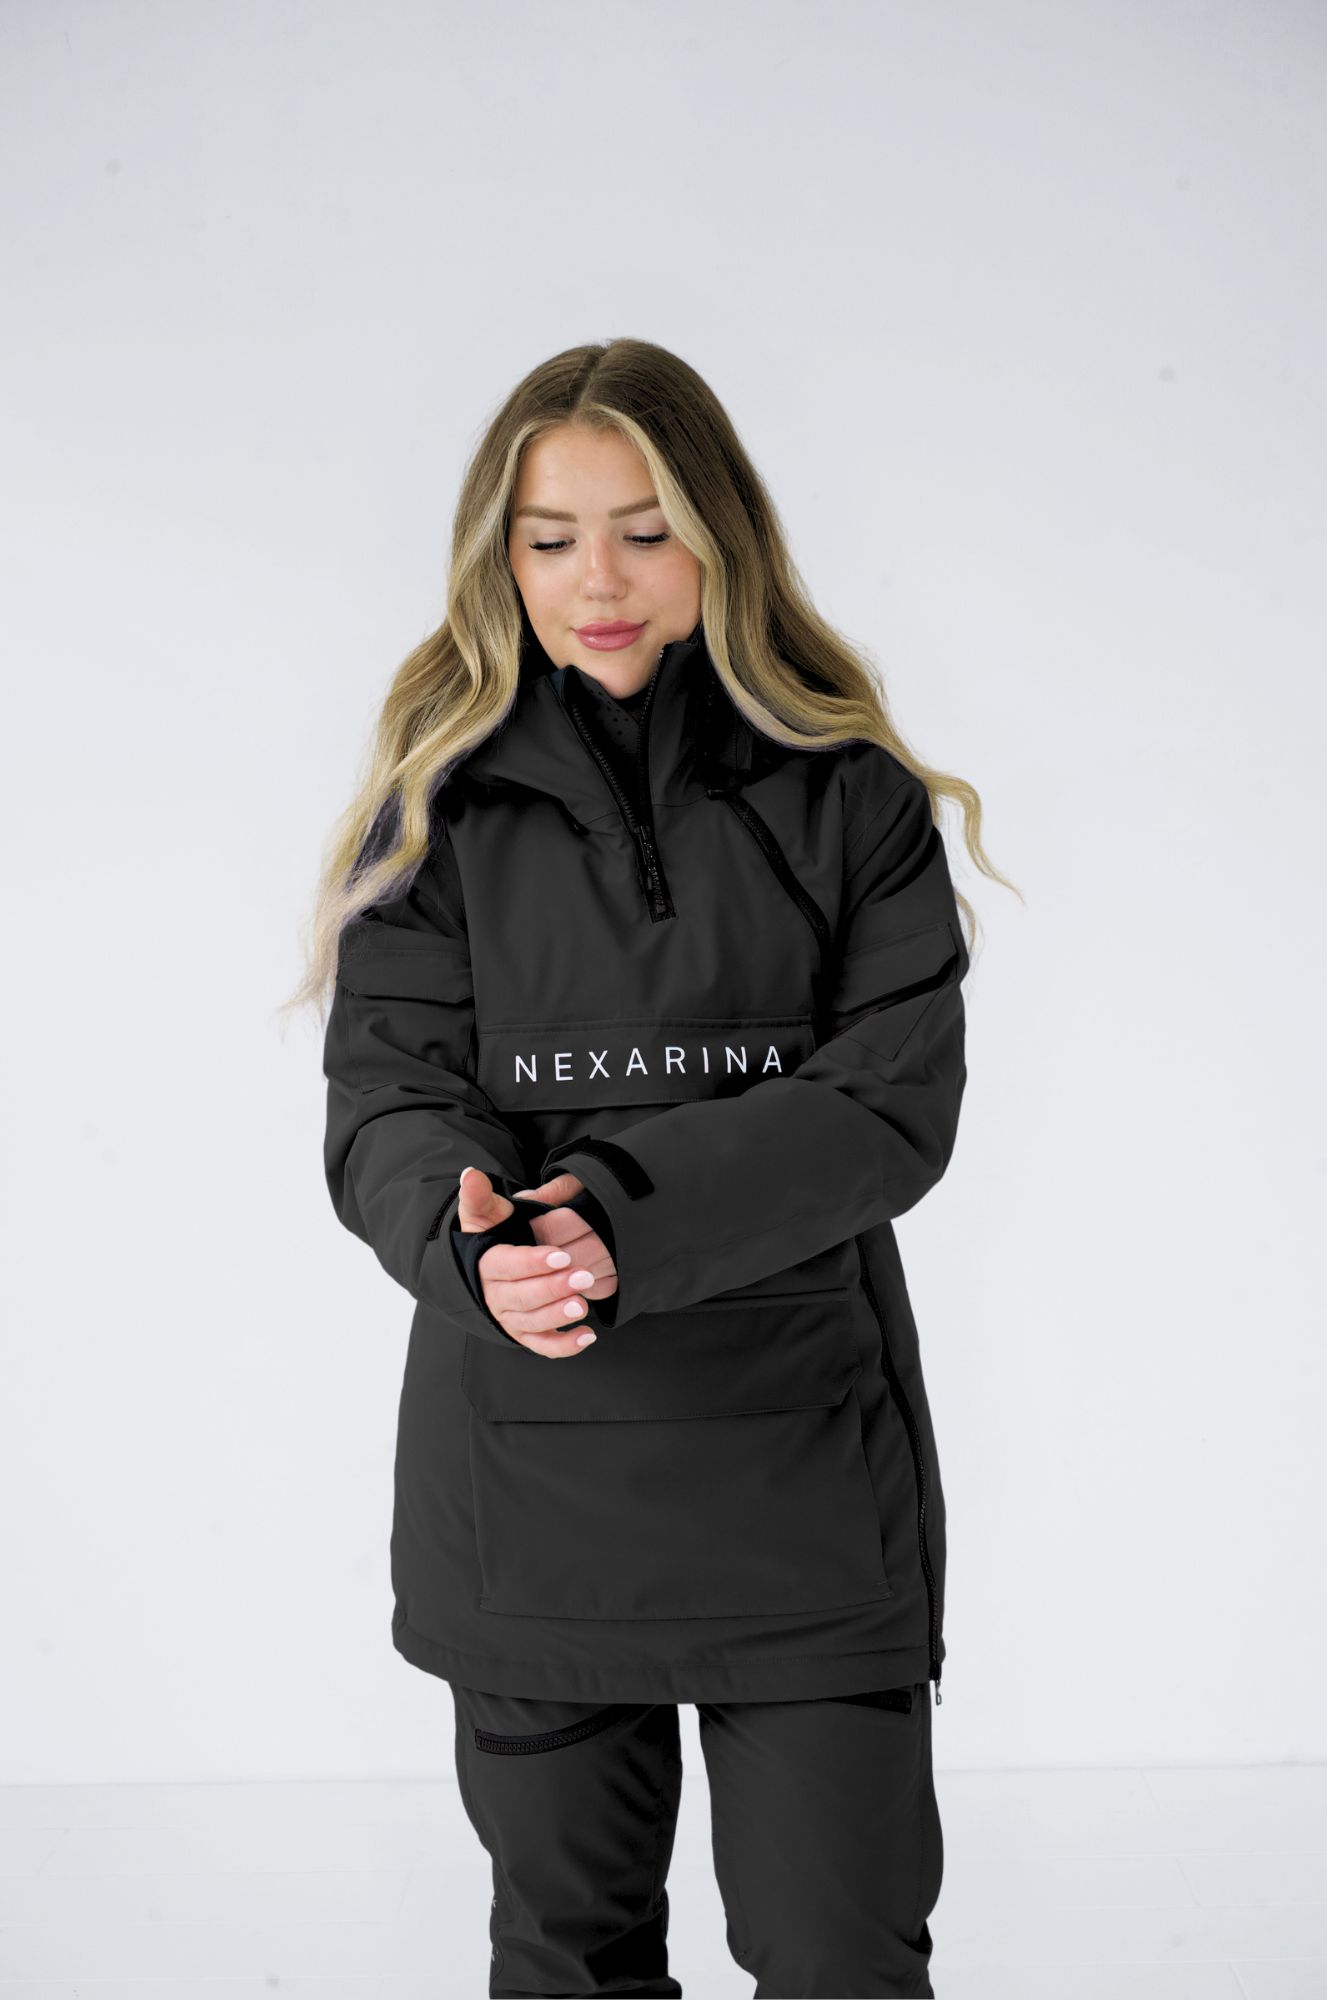 Woman adjusting hood of black Nexarina jacket, front view, standing against a white background.